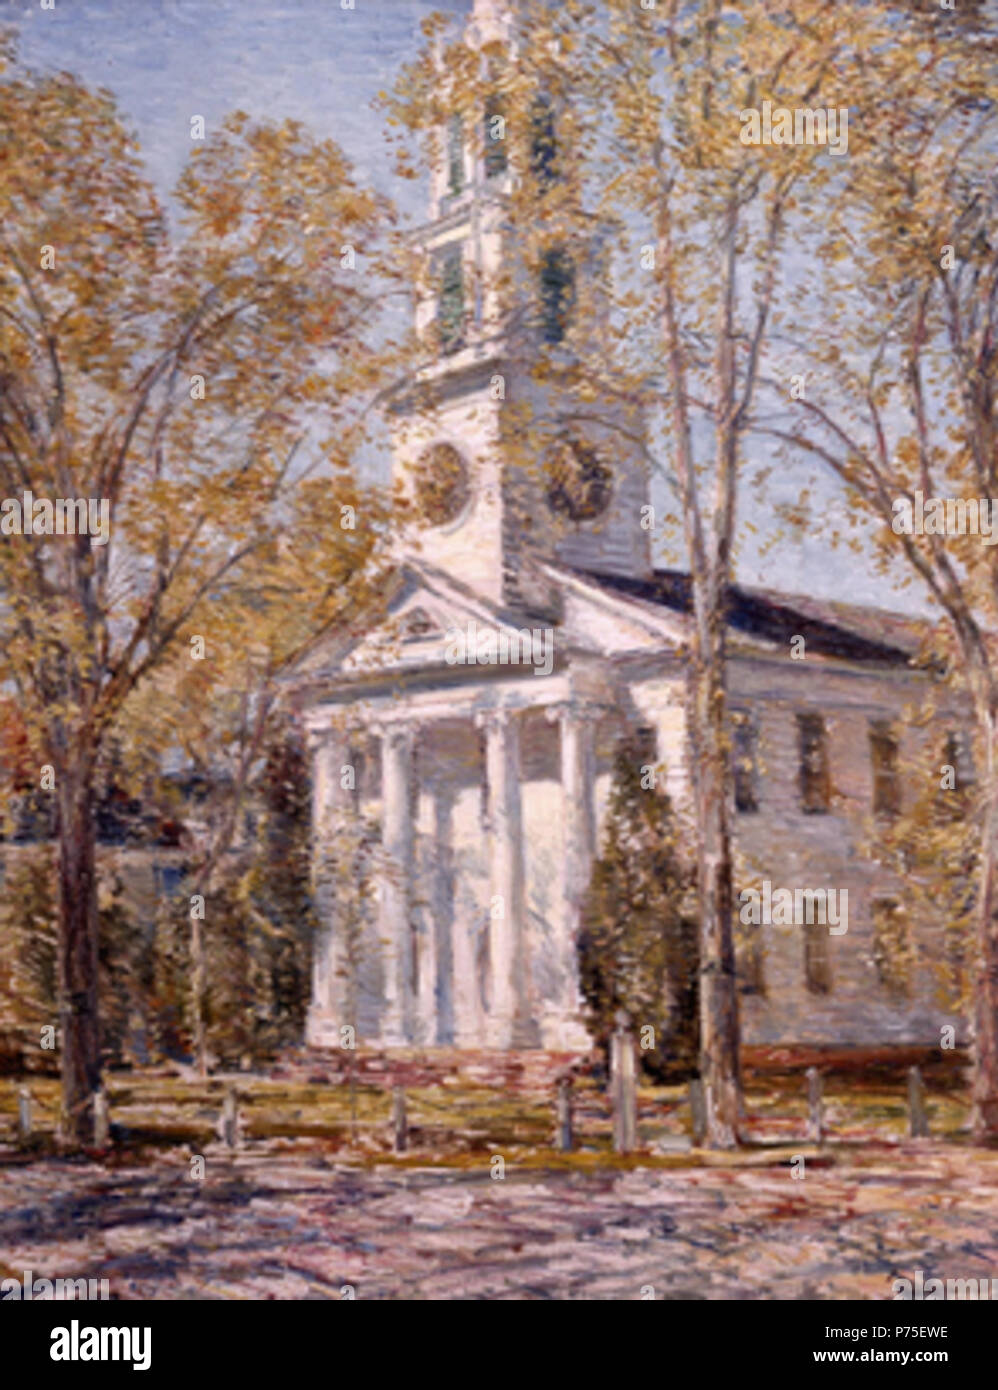 English: Church at Old Lyme — oil on canvas painting by Frederick Childe Hassam, 1906. Parrish Art Museum, Southampton, NY  . 1906 124 Frederick Childe Hassam, Church at Old Lyme, 1906. Oil on canvas. Parrish Art Museum, Southampton, NY Stock Photo